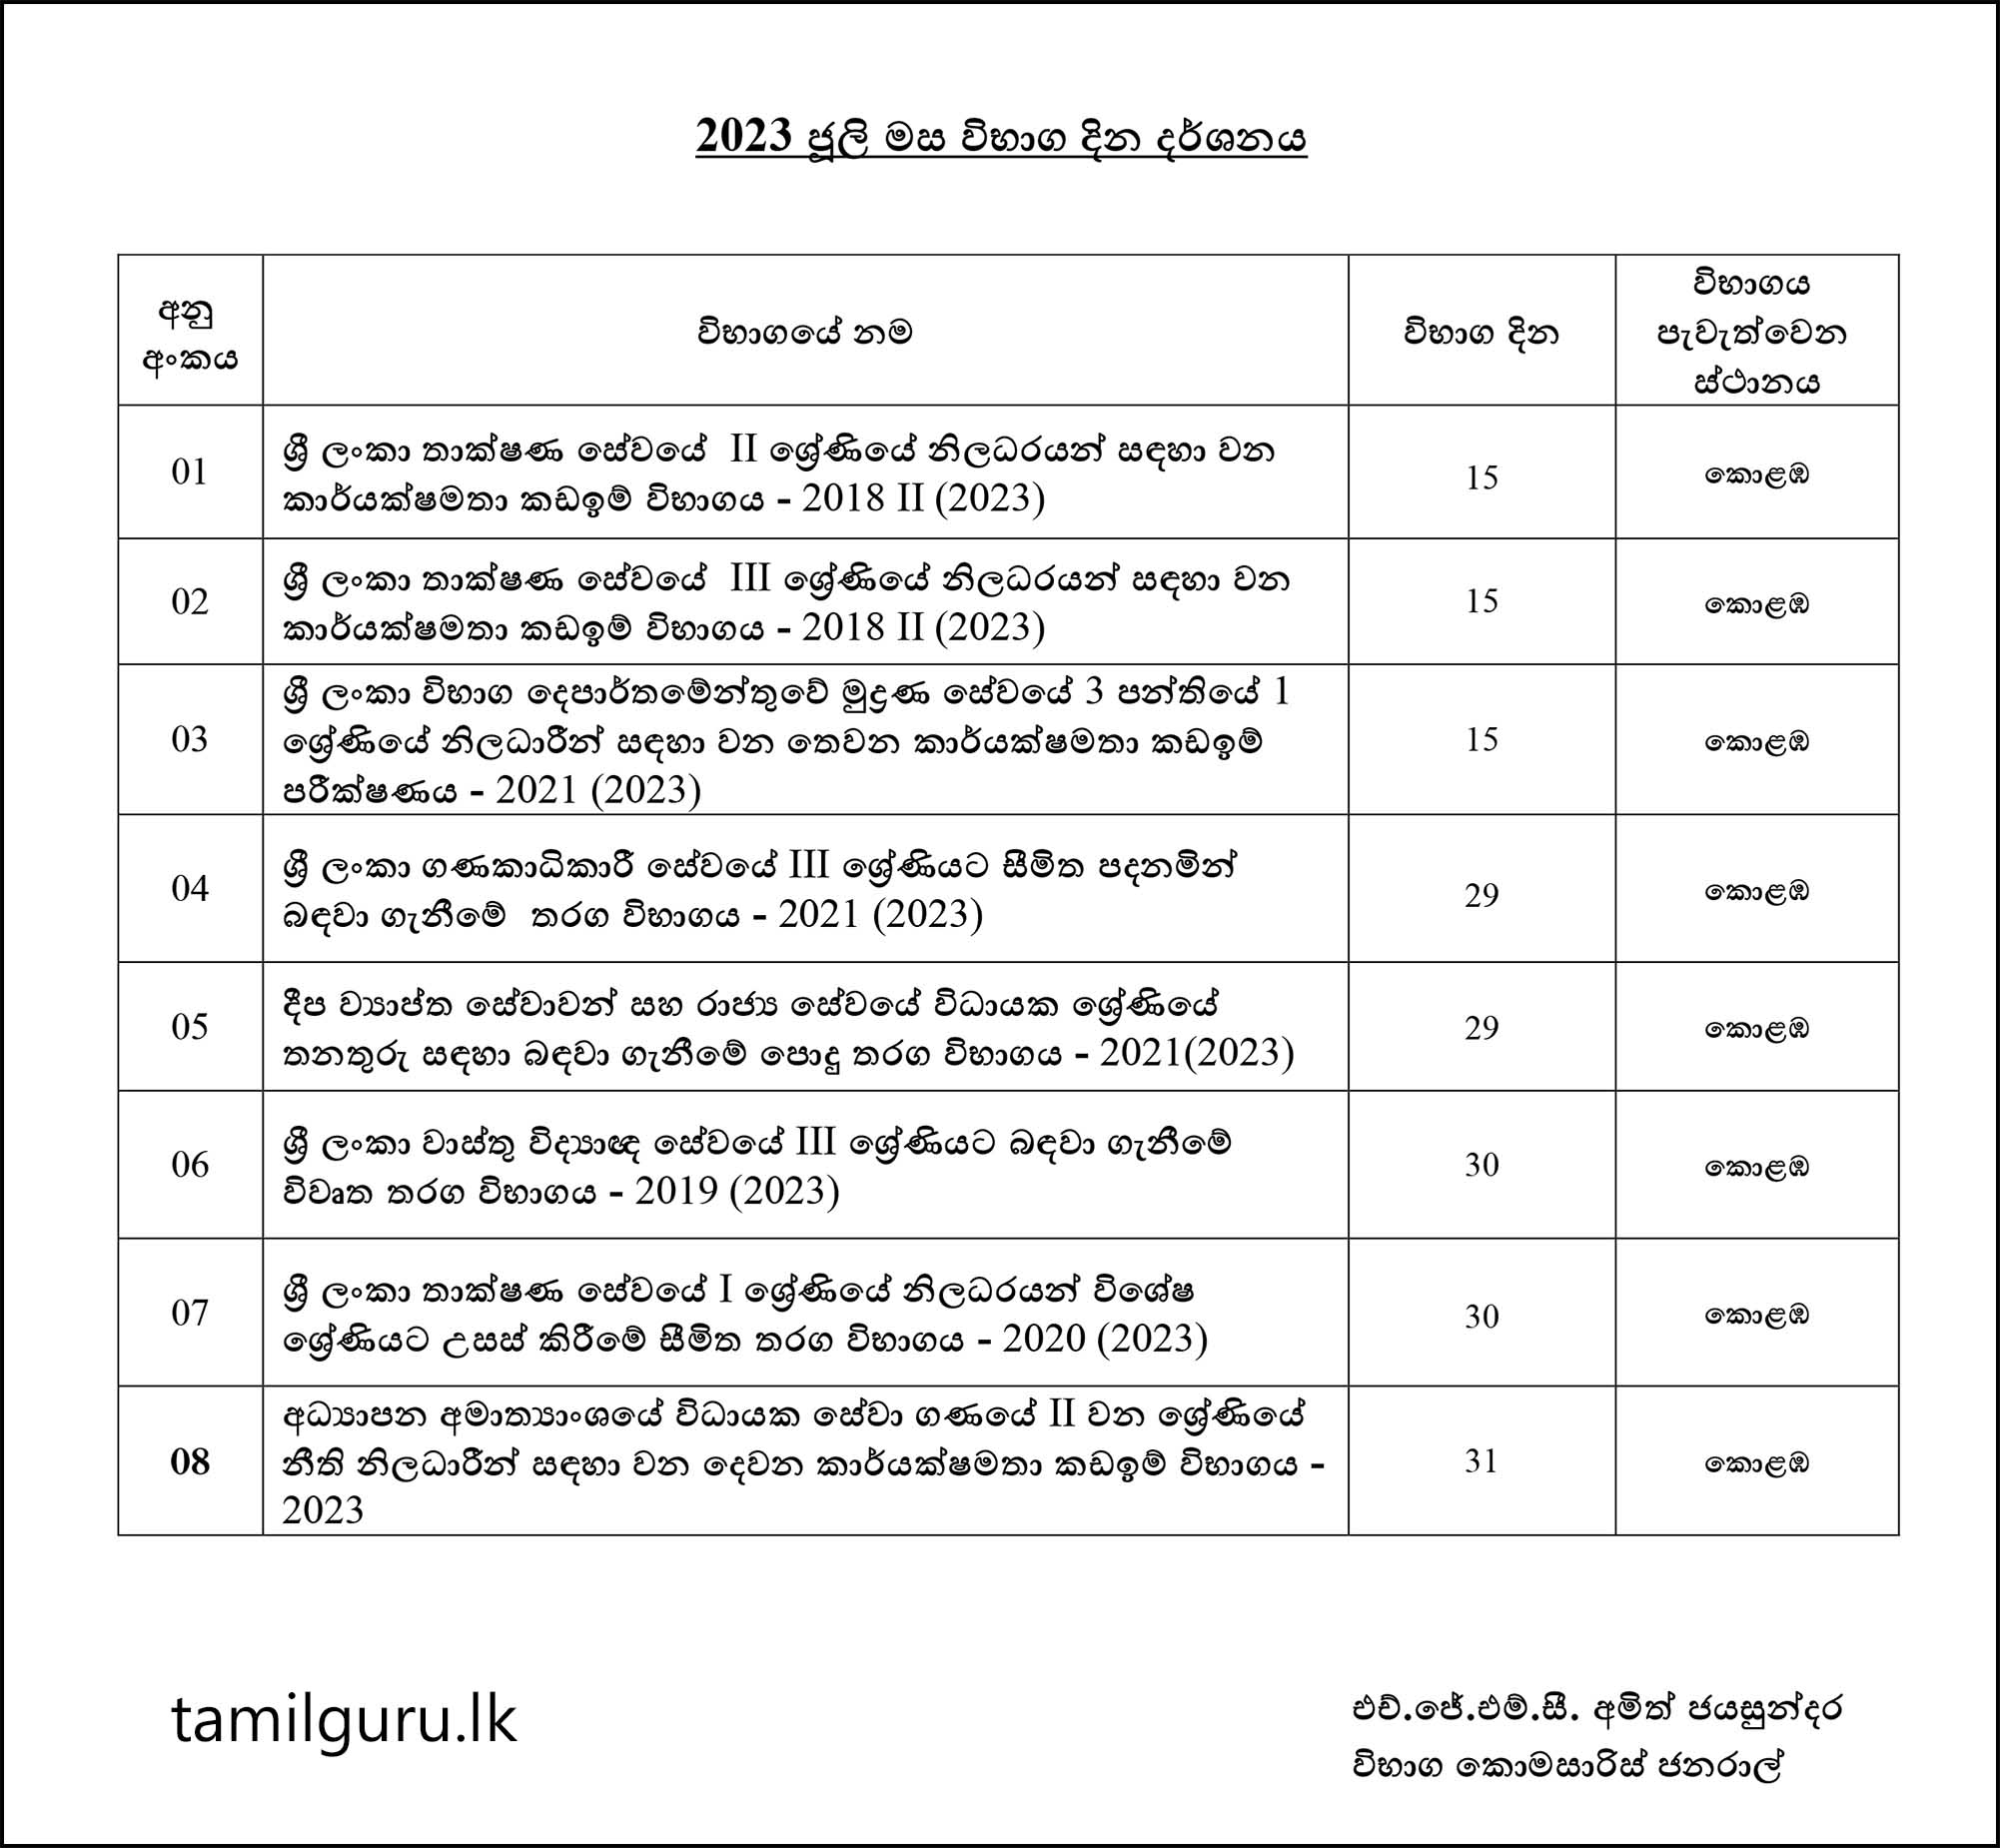 Examination Calendar for July 2023 - Department of Examinations